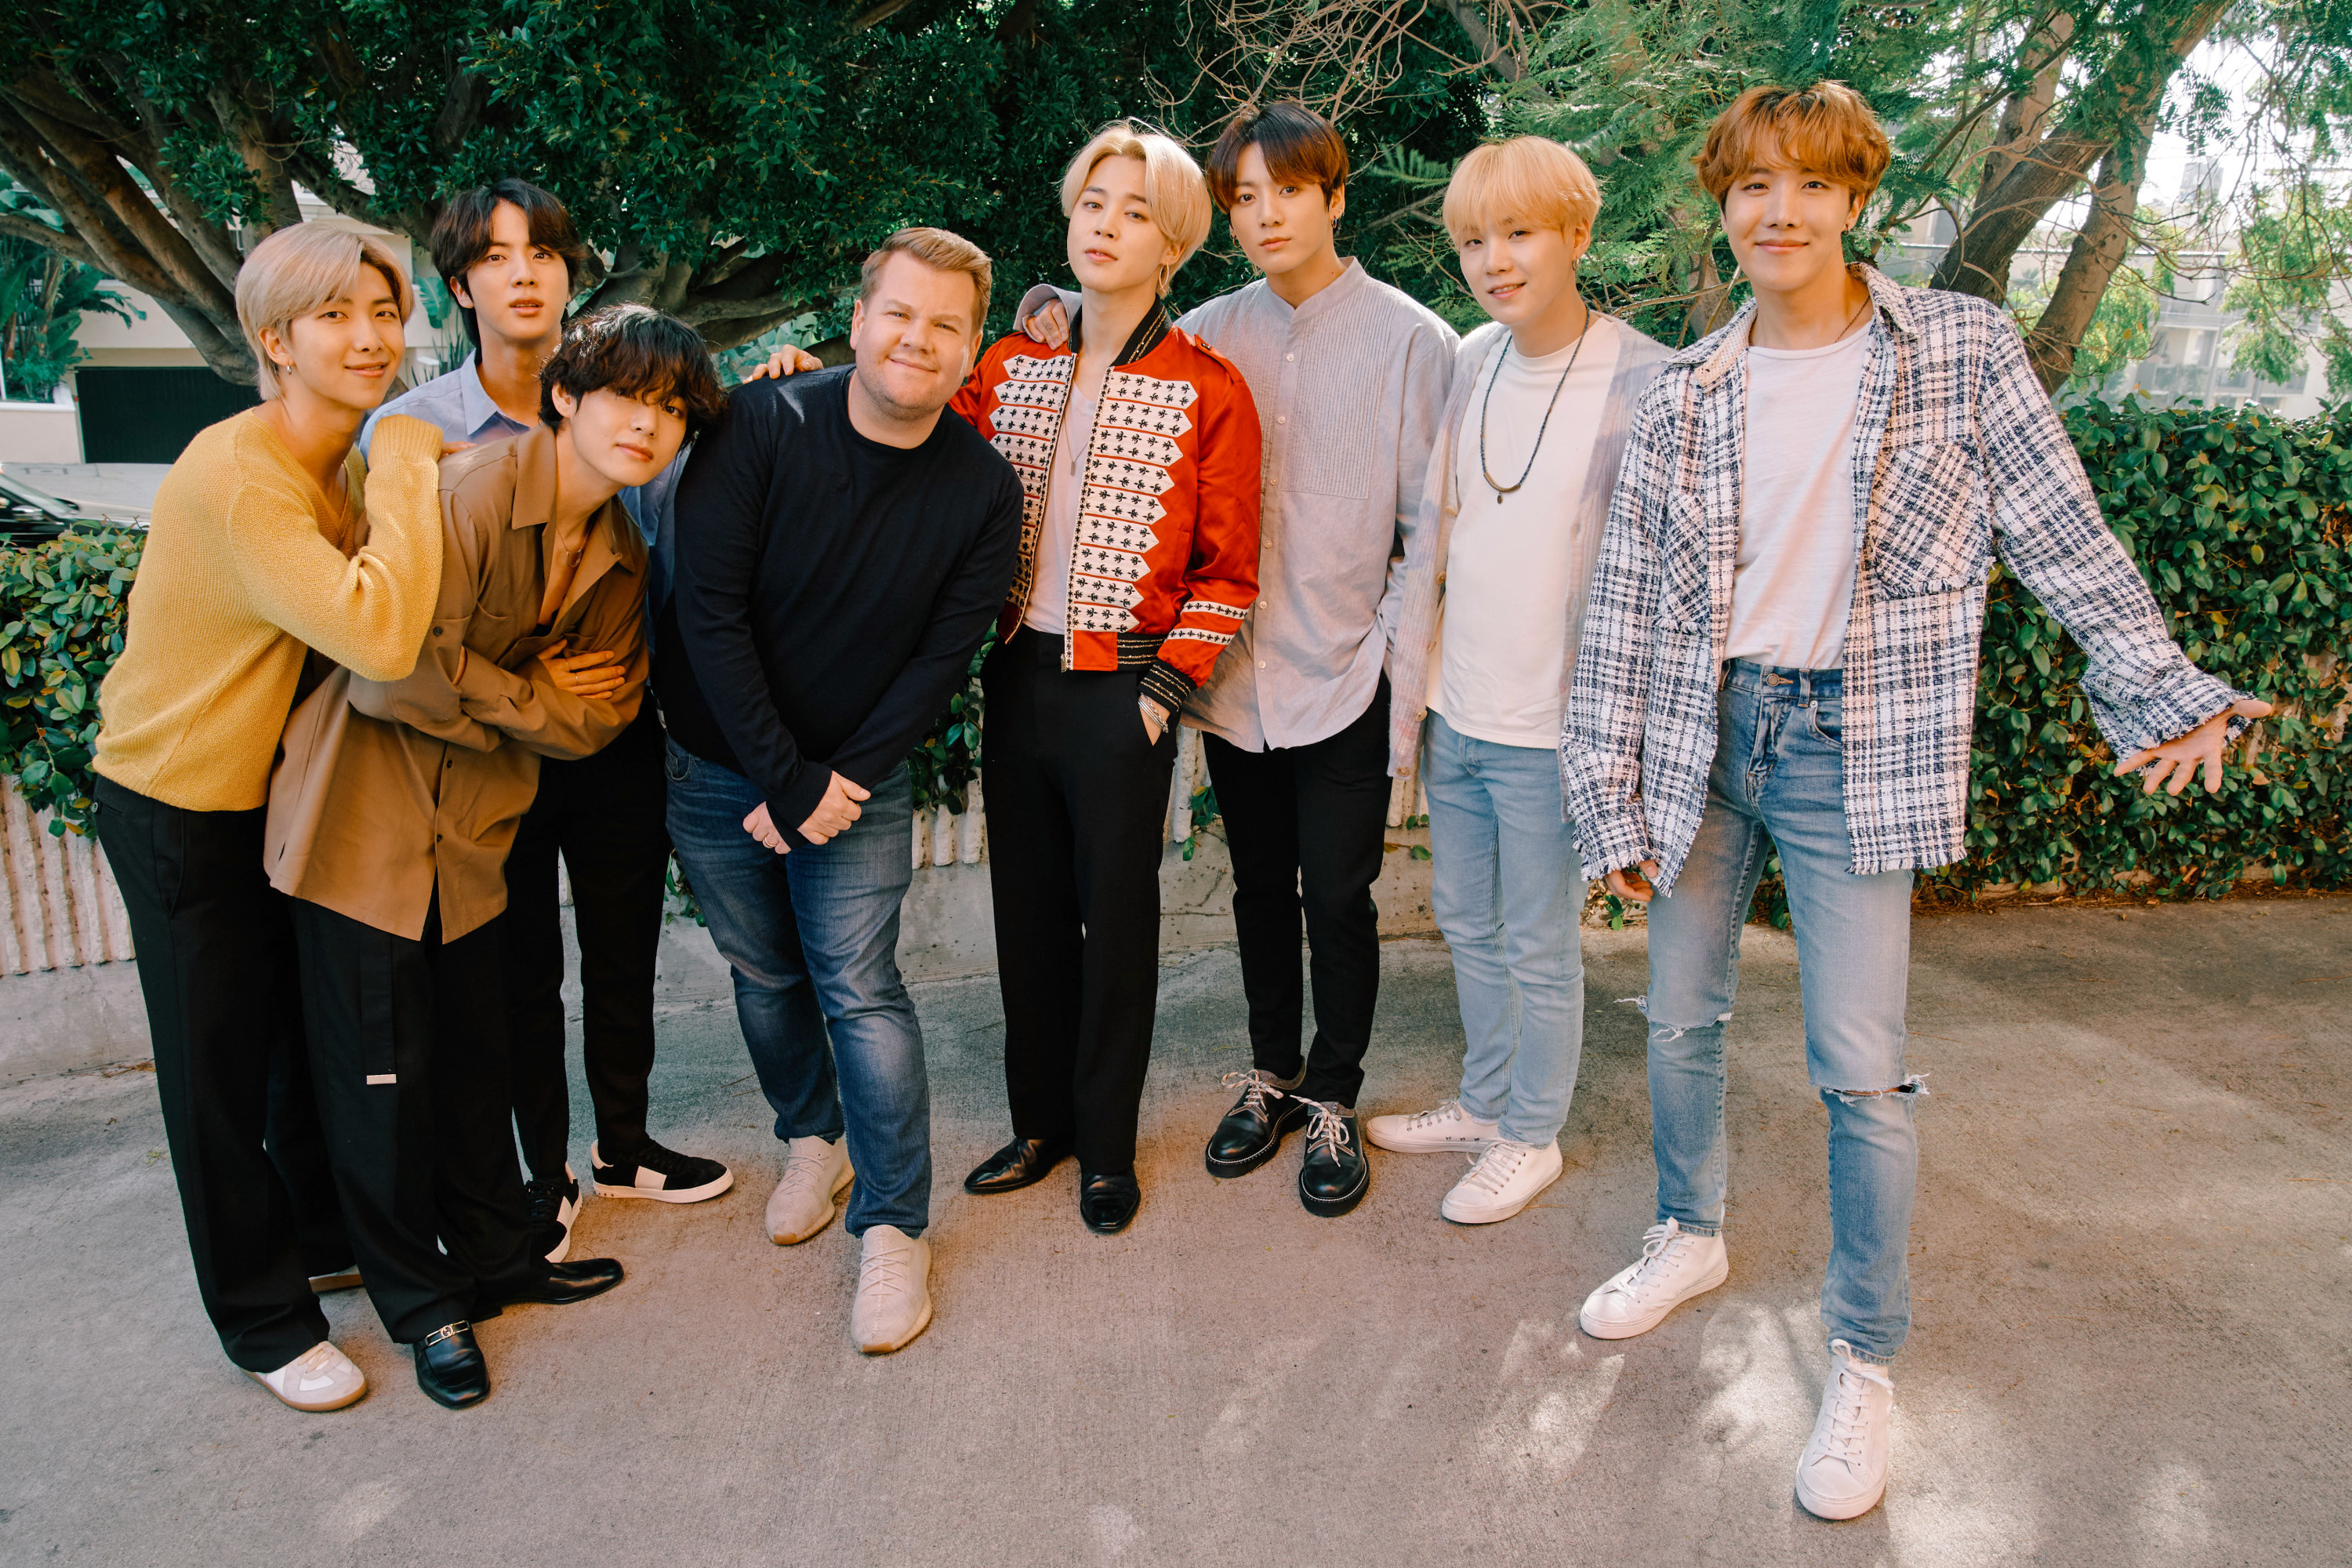 James with the members of BTS